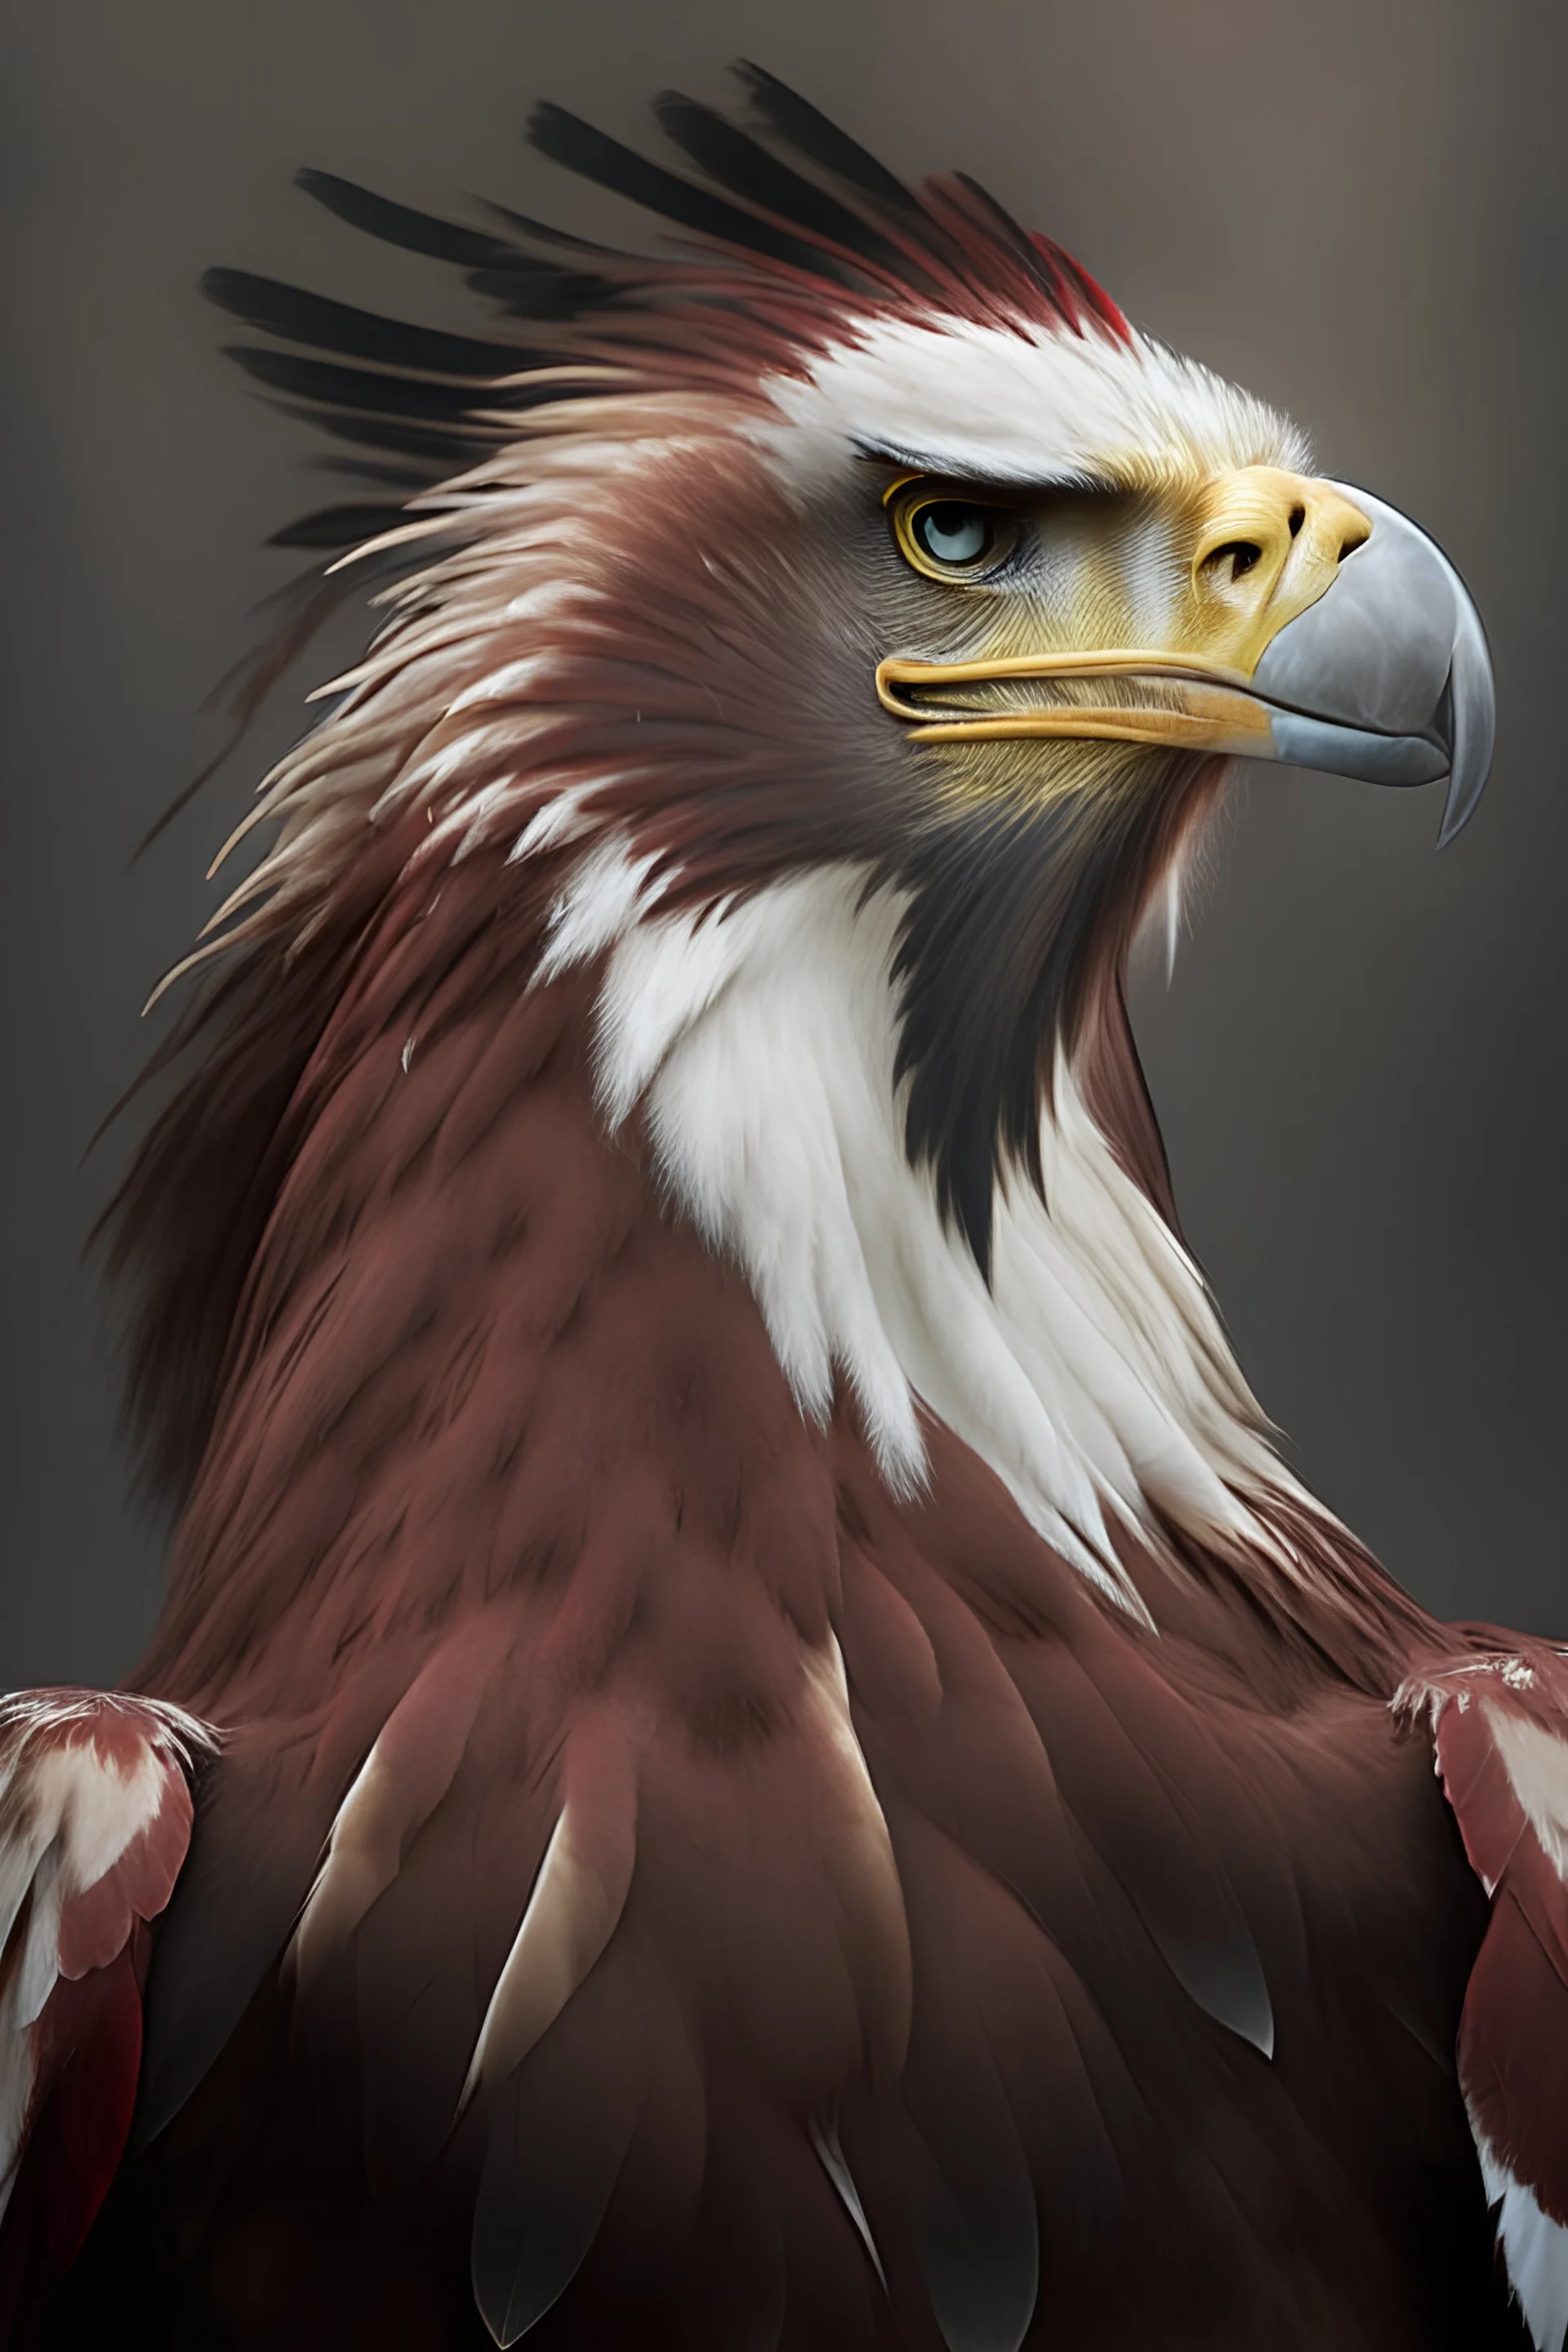 Aquilamon is giant Bald Eagle (Haliaeetus leucocephalus) with red feathers and a ruff of brown feathers at the base of it neck. Its head is adorned with two large horns and a single long feather as a crest.